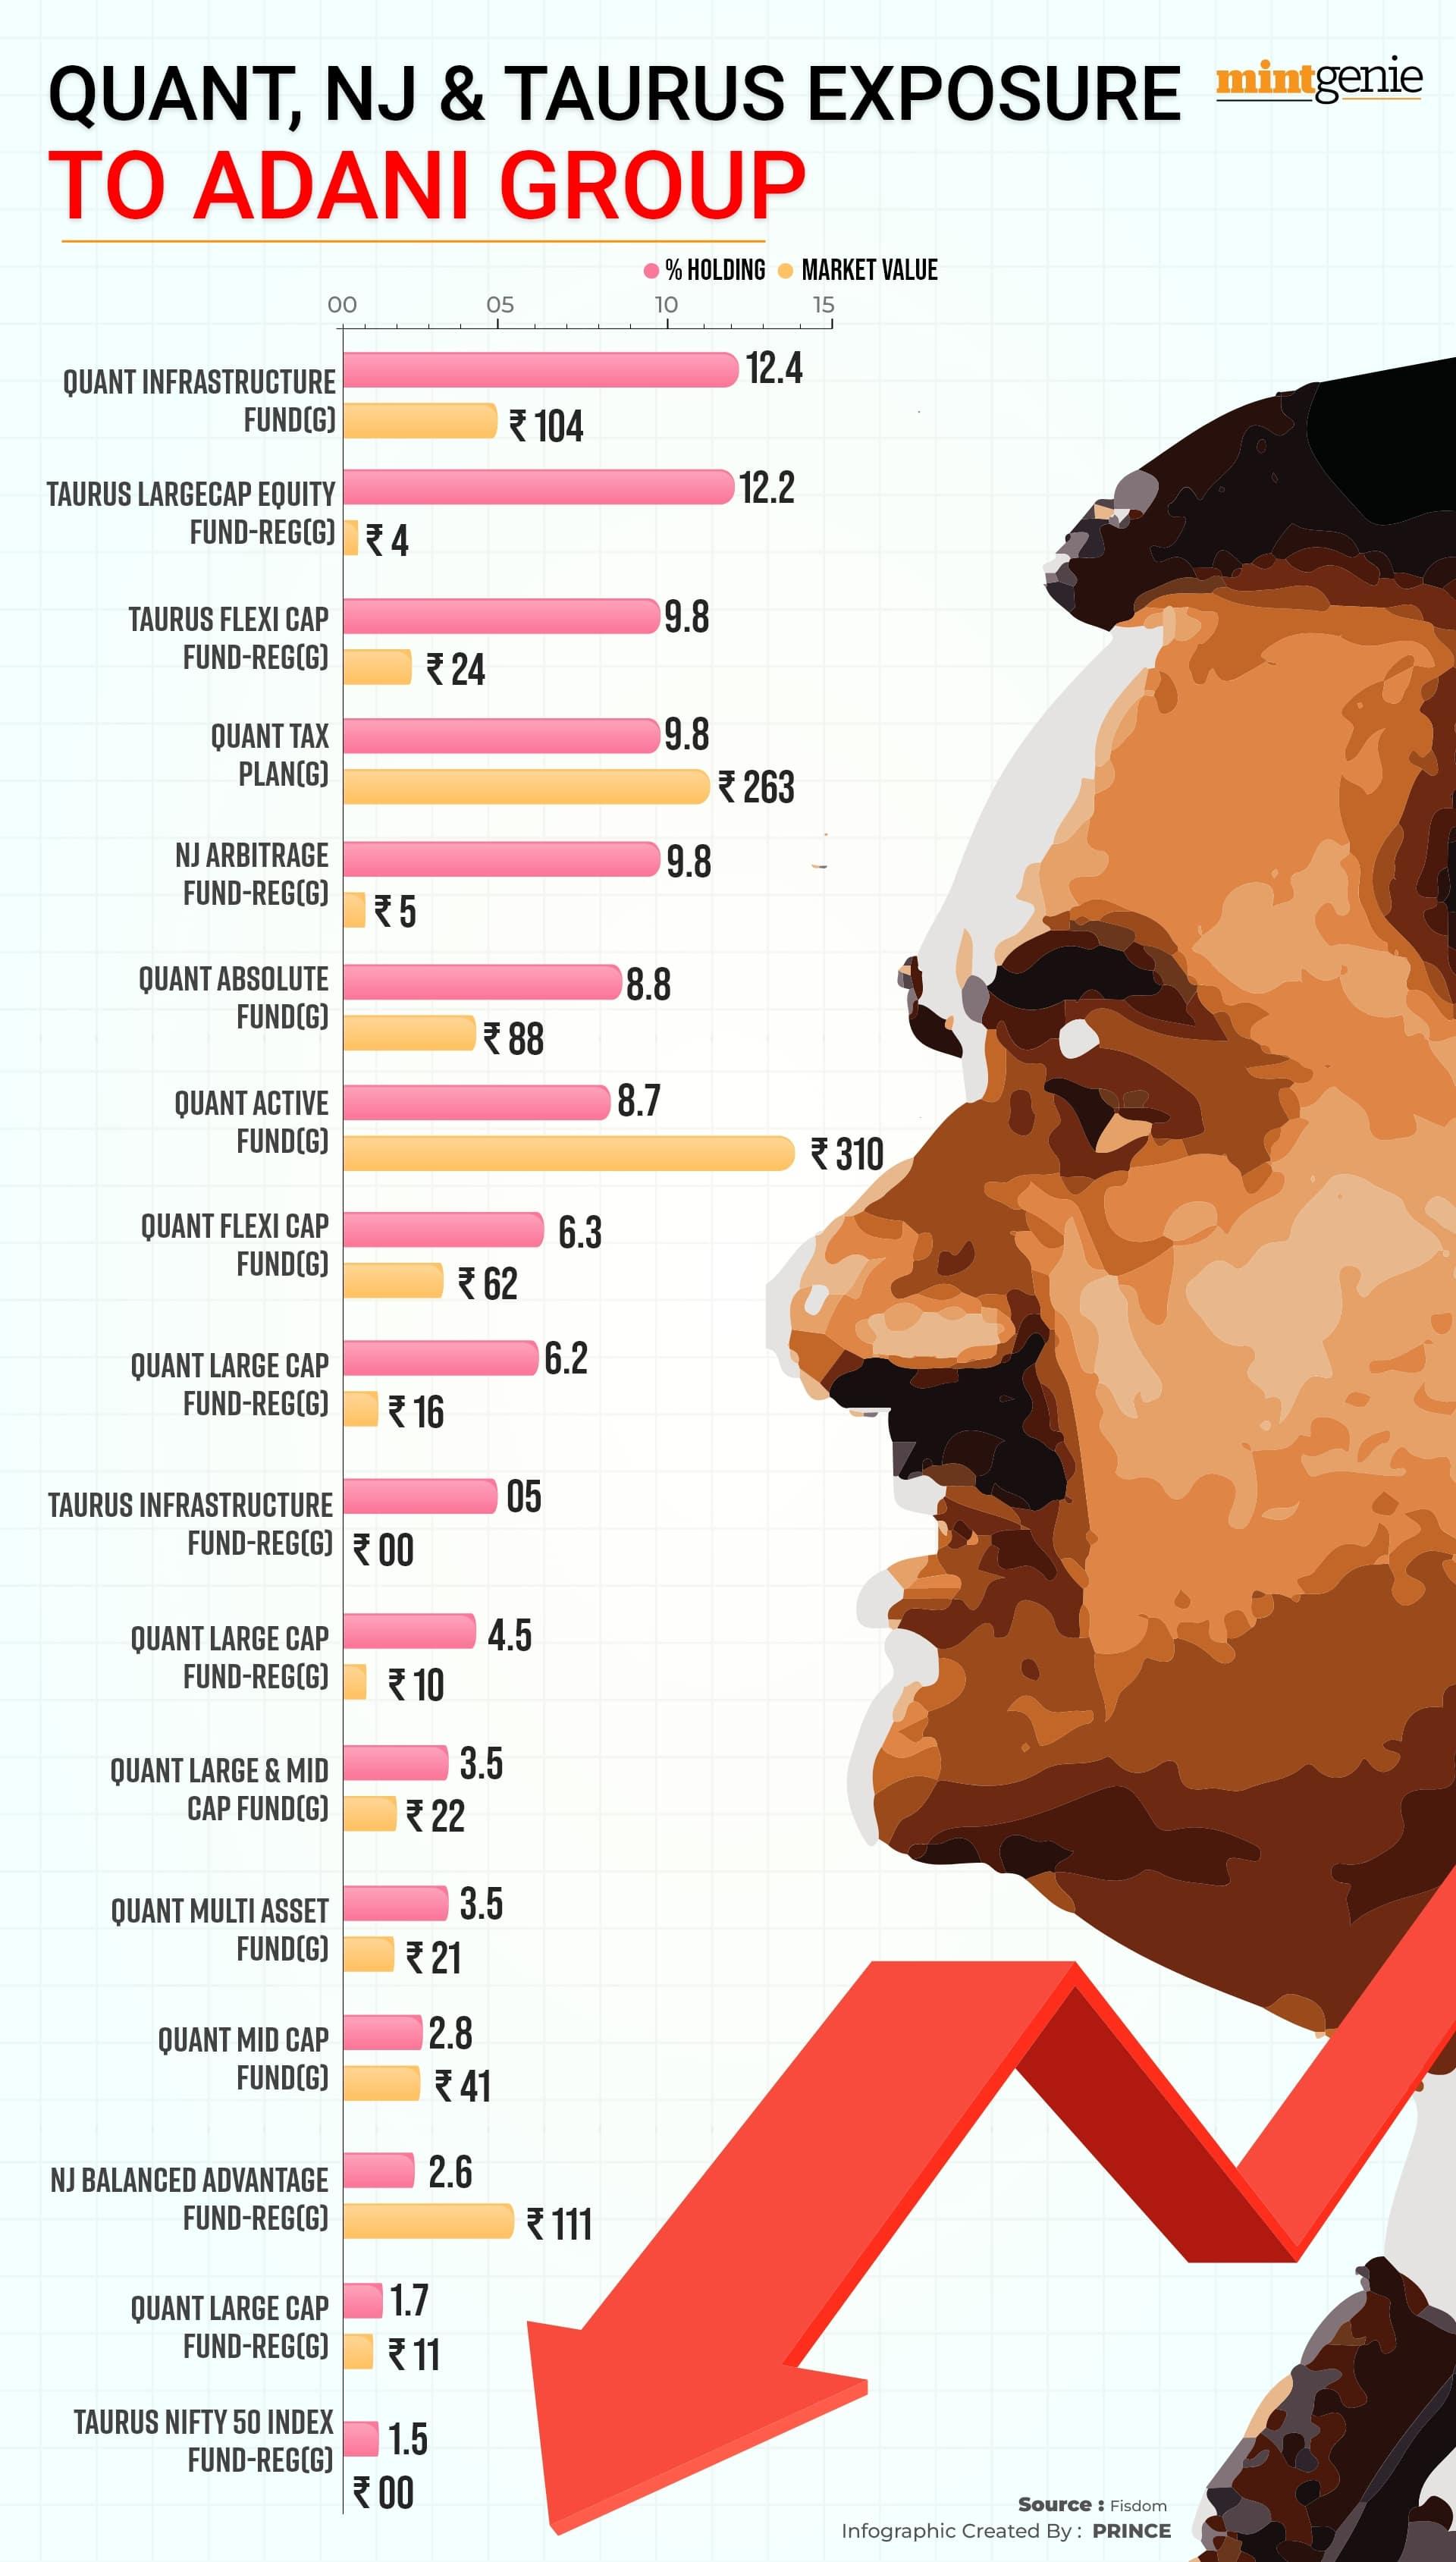 5 schemes with highest exposure to Adani Group